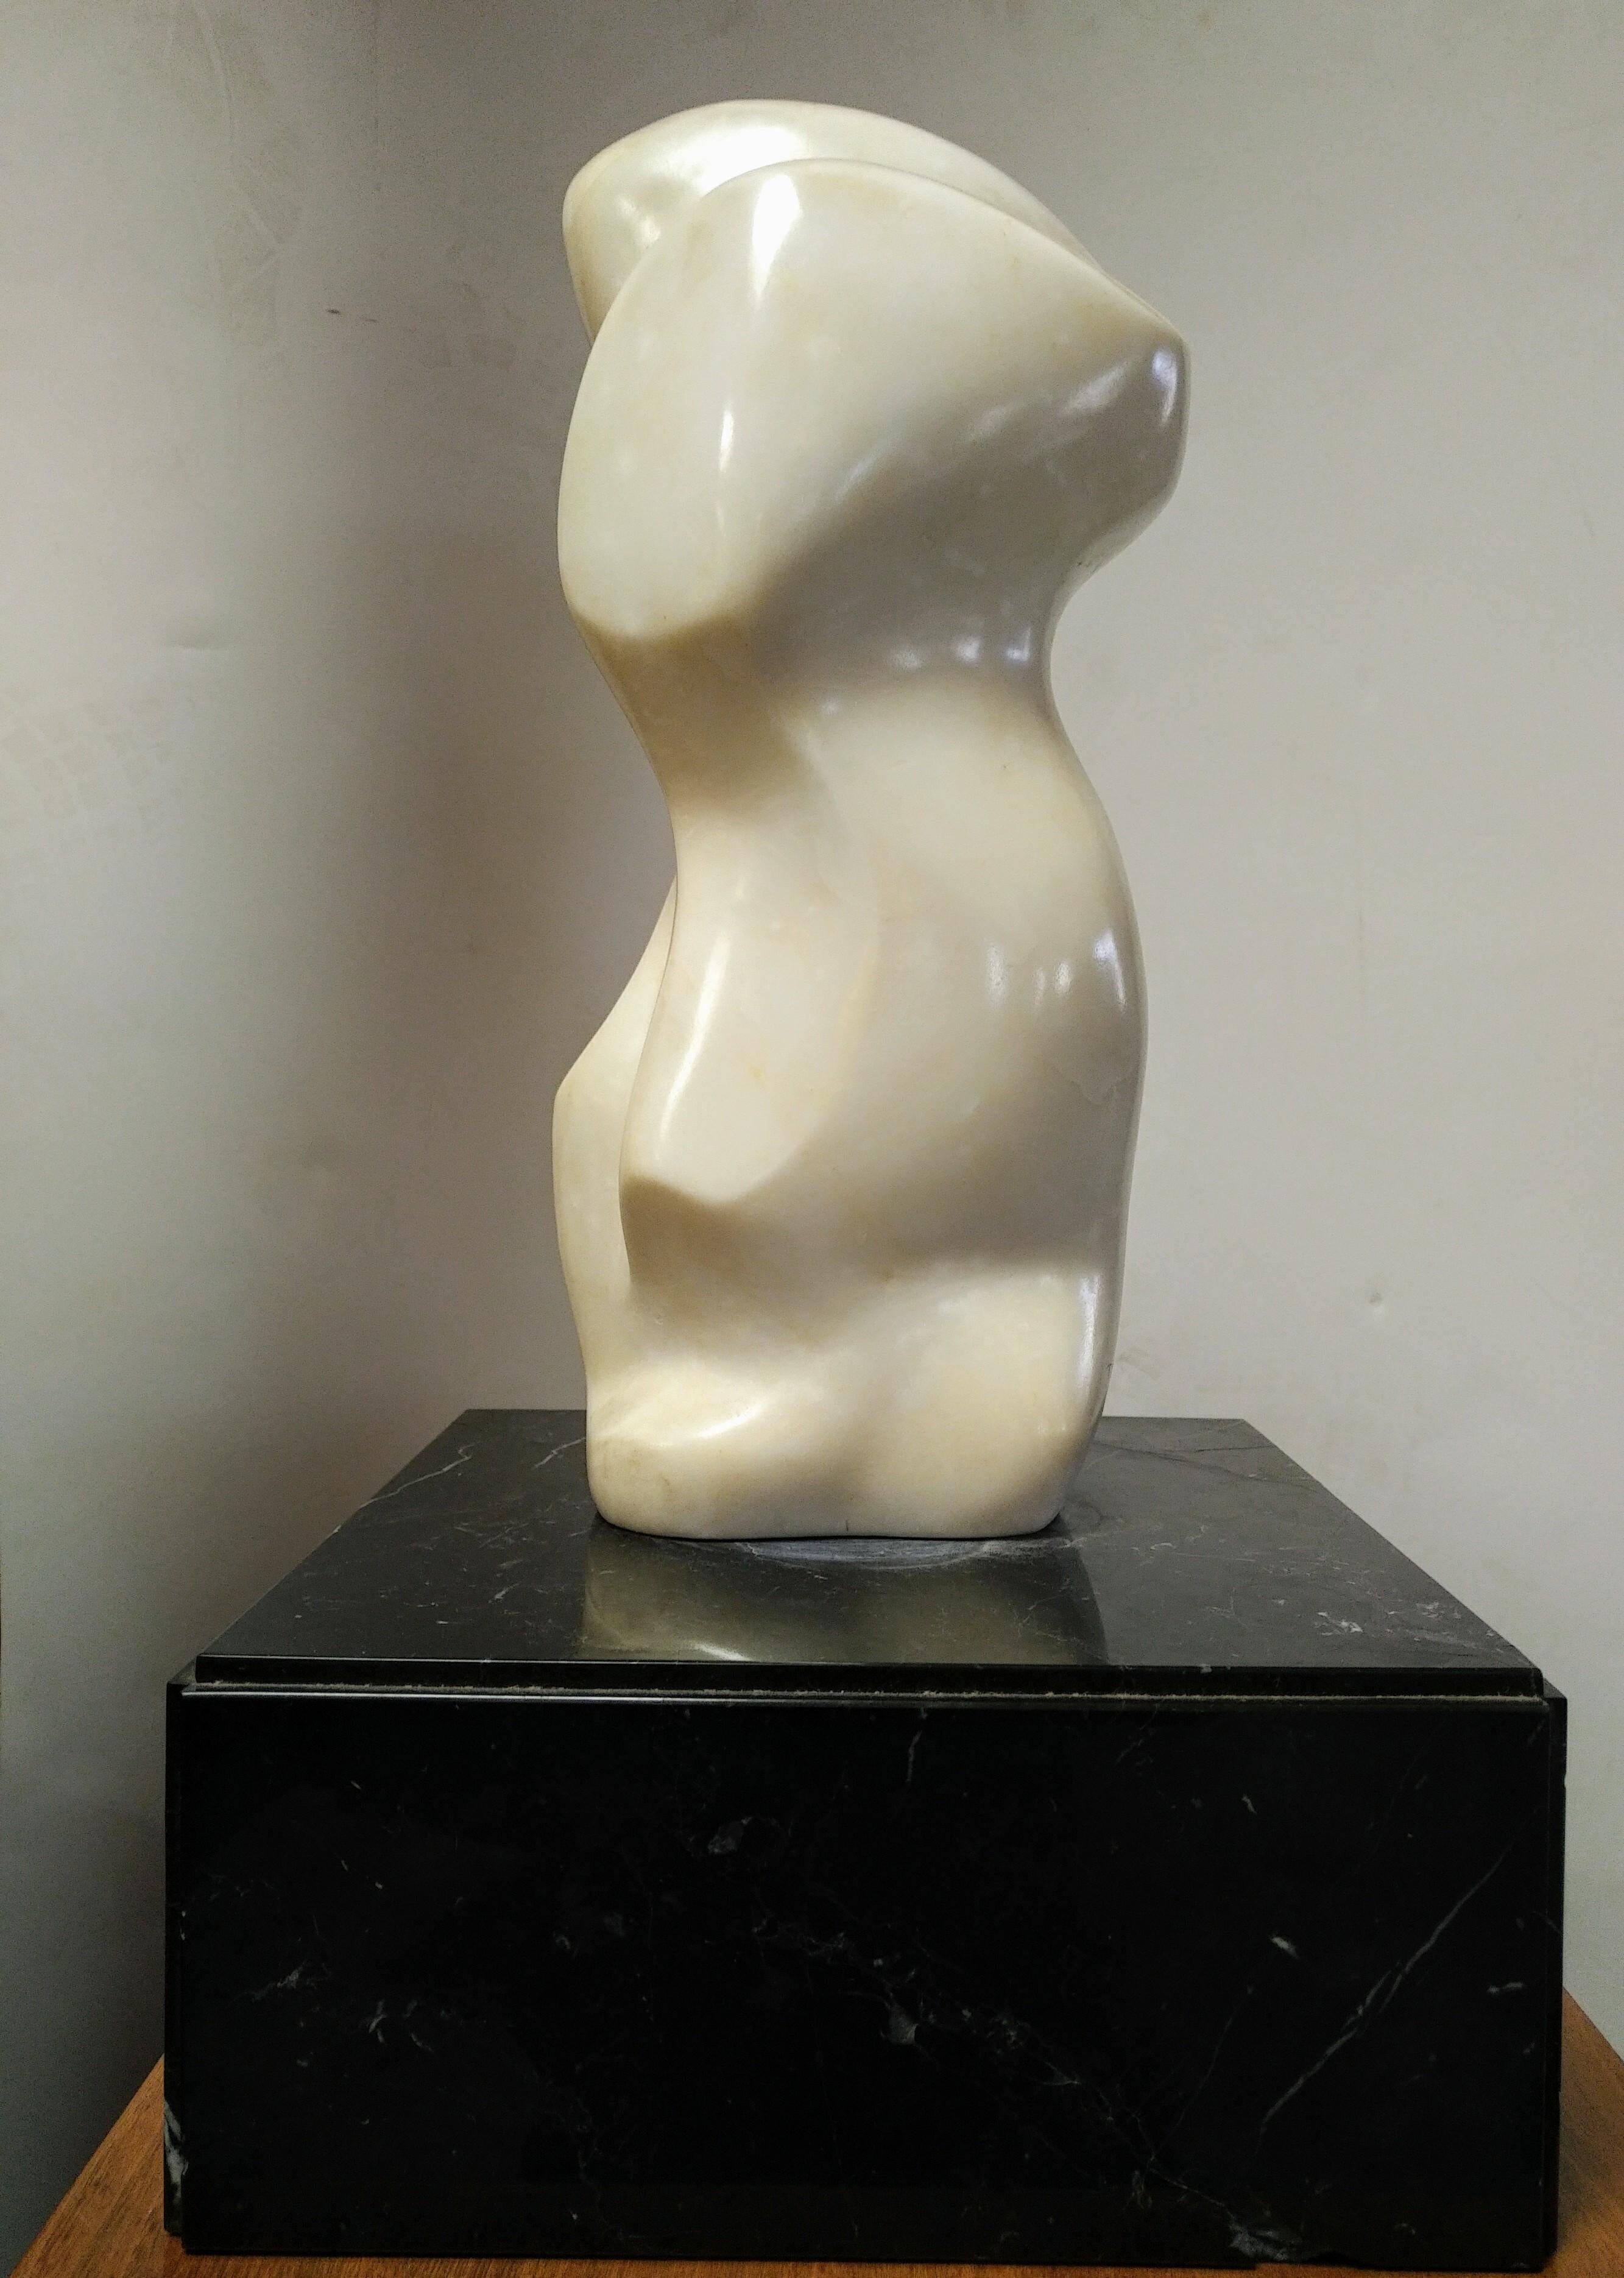 Beautiful carved abstract white marble sculpture on a black marble base. 
Signed.
Height: 22in with the base and 16,8in without. 
Depth : 4in 
Base :  5,2in x 12,5in x 12,5in

About :
Istvan Toth was a Hungarian artist who lived and worked in the